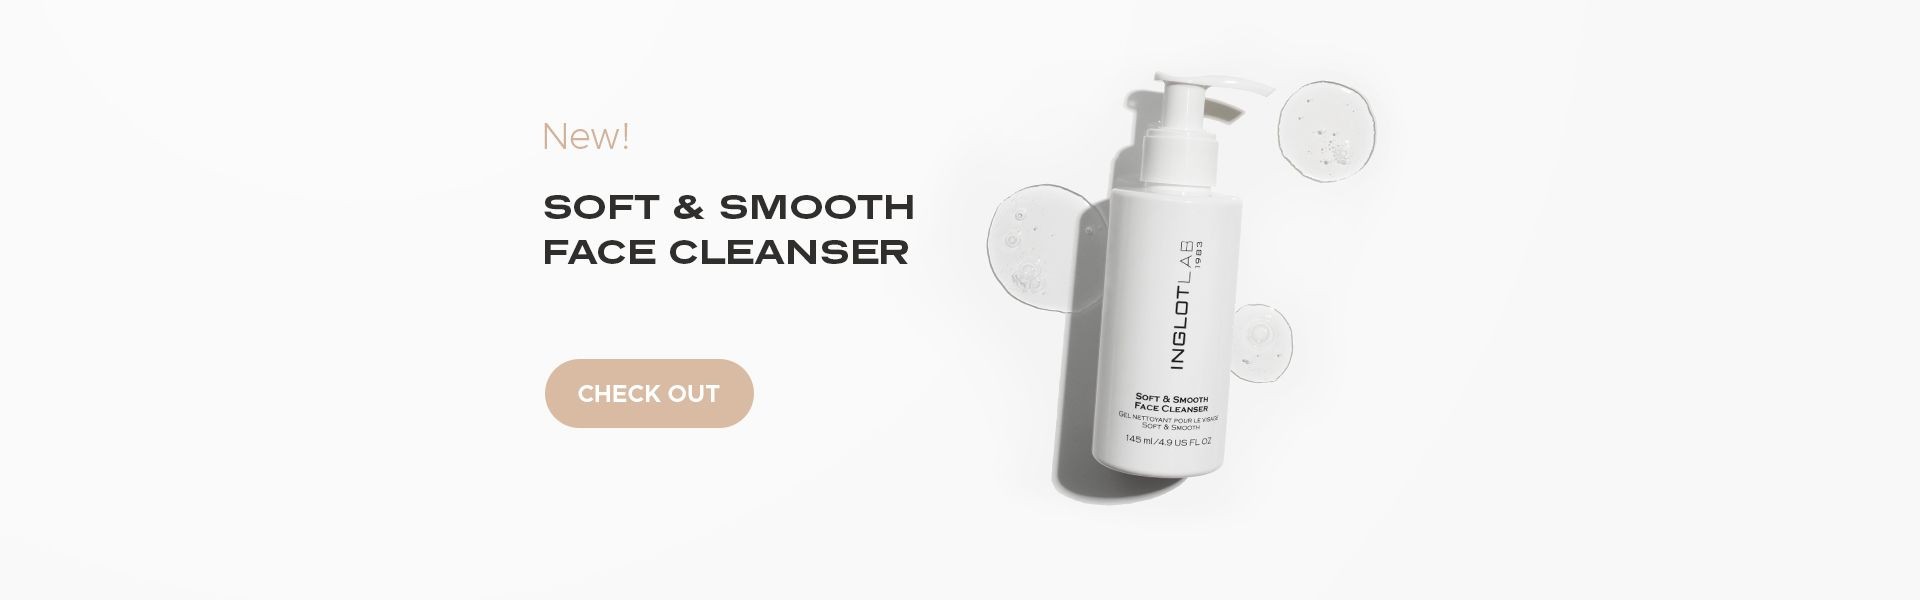 Soft & Smooth Cleanser